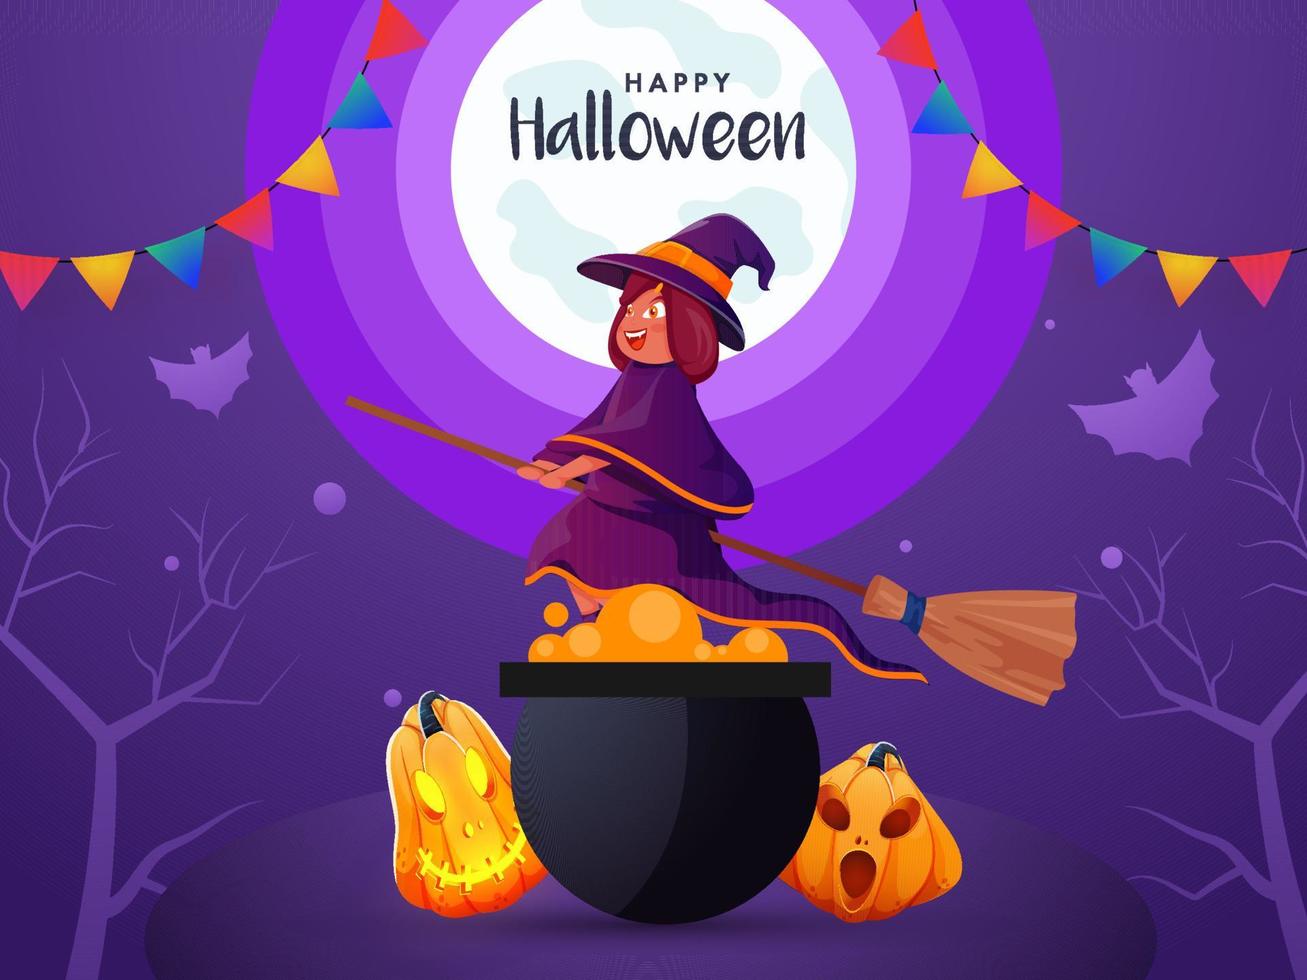 Halloween Full Moon Background With Witch Flying At Broomstick, Jack-O-Lanterns And Cauldron Illustration. vector